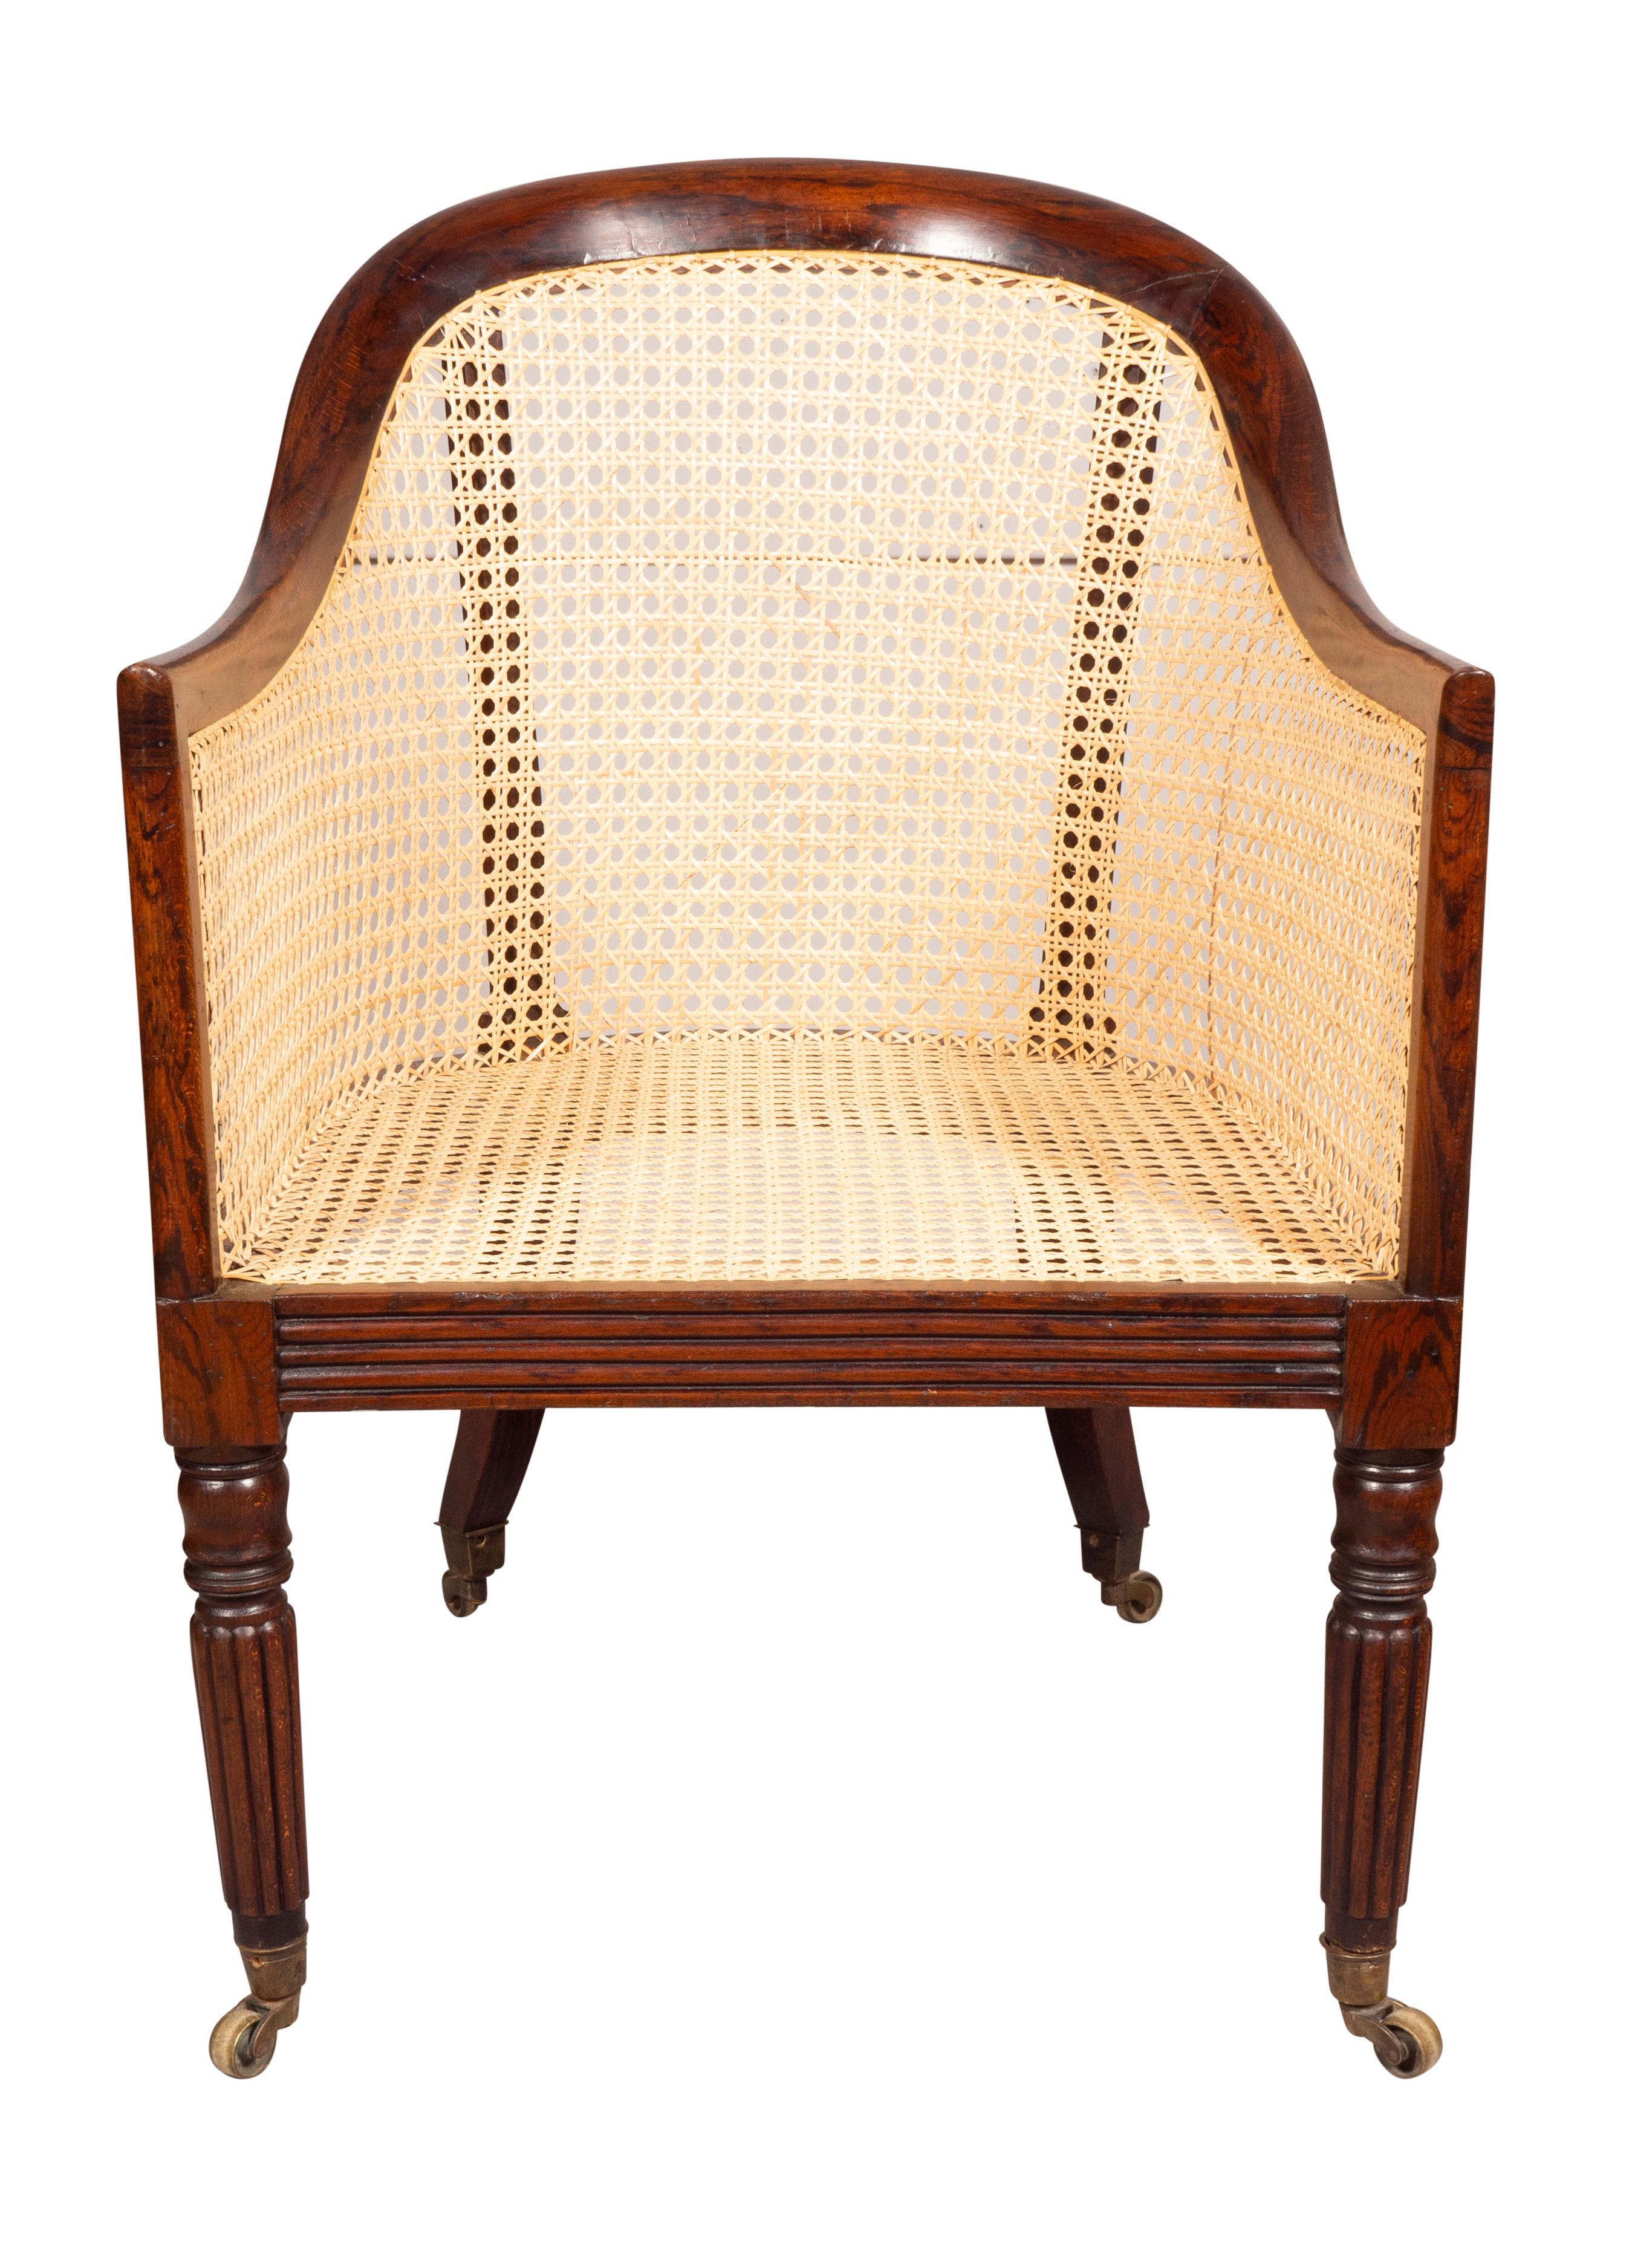 With an arched back. Completely newly hand caned. Reeded chair rail. Raised on circular tapered reeded legs. Casters.